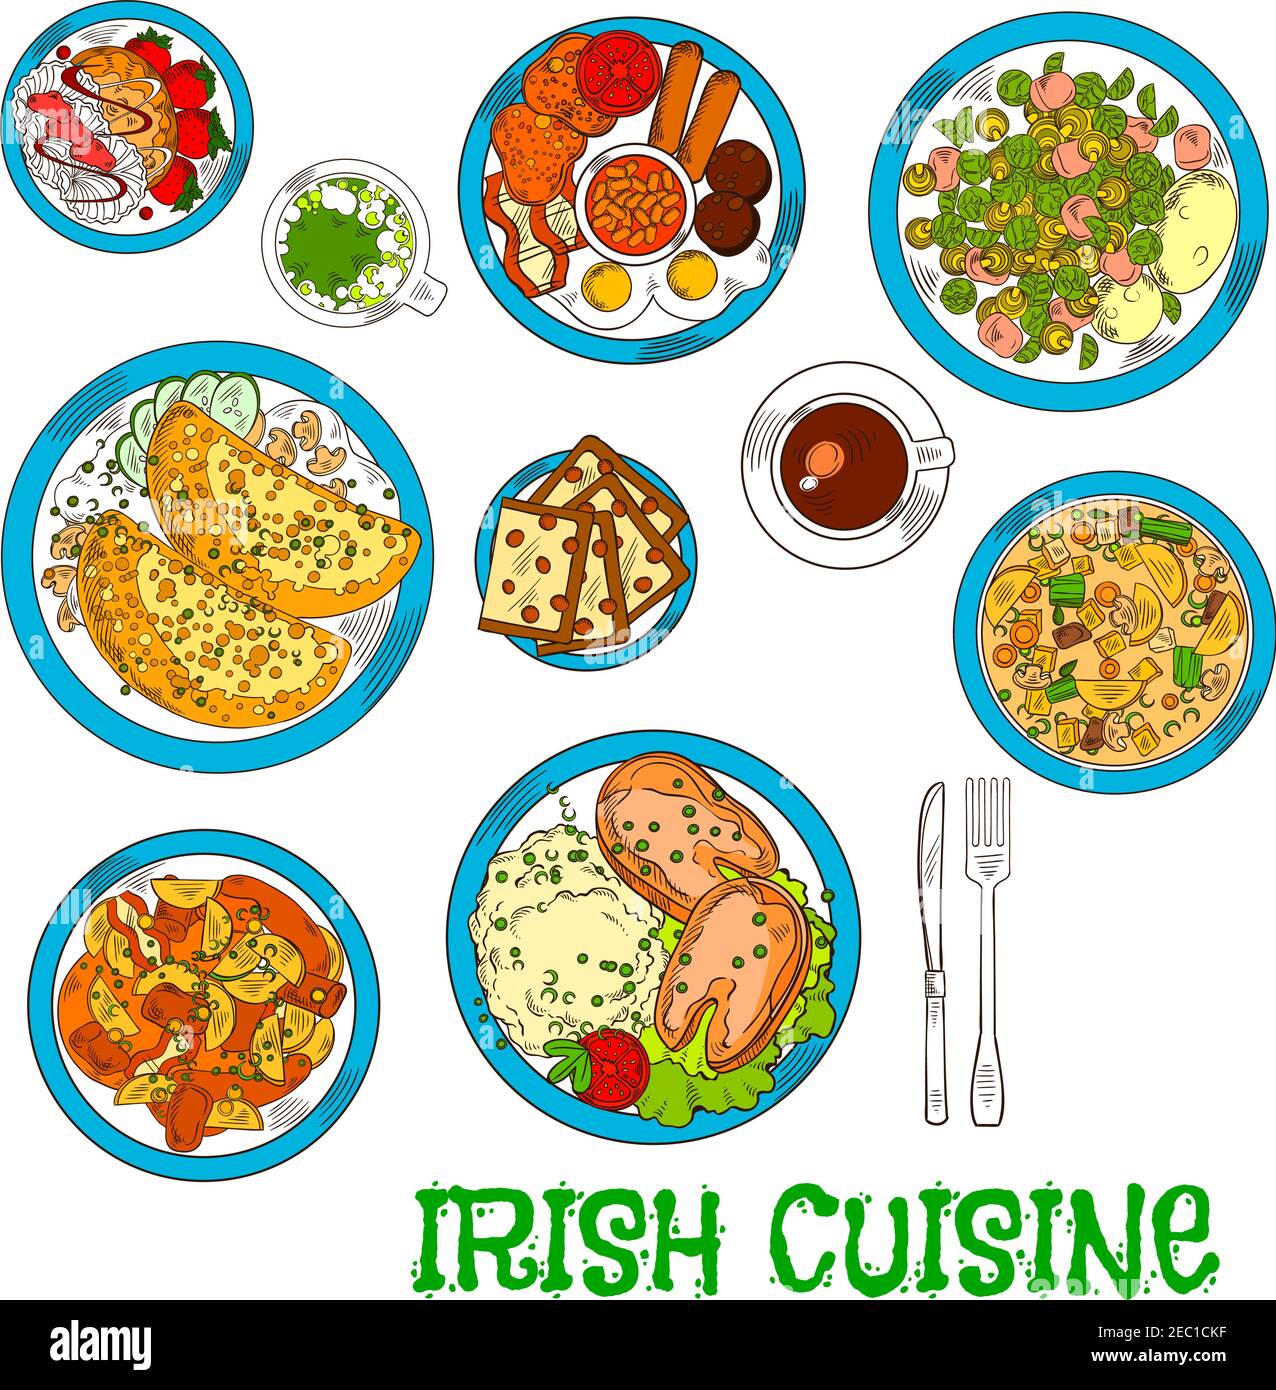 Irish cuisine dishes served with vegetable lamb stew and potato pancakes boxty with sauce, potato stew coddle with sausages and mashed potato with fis Stock Vector